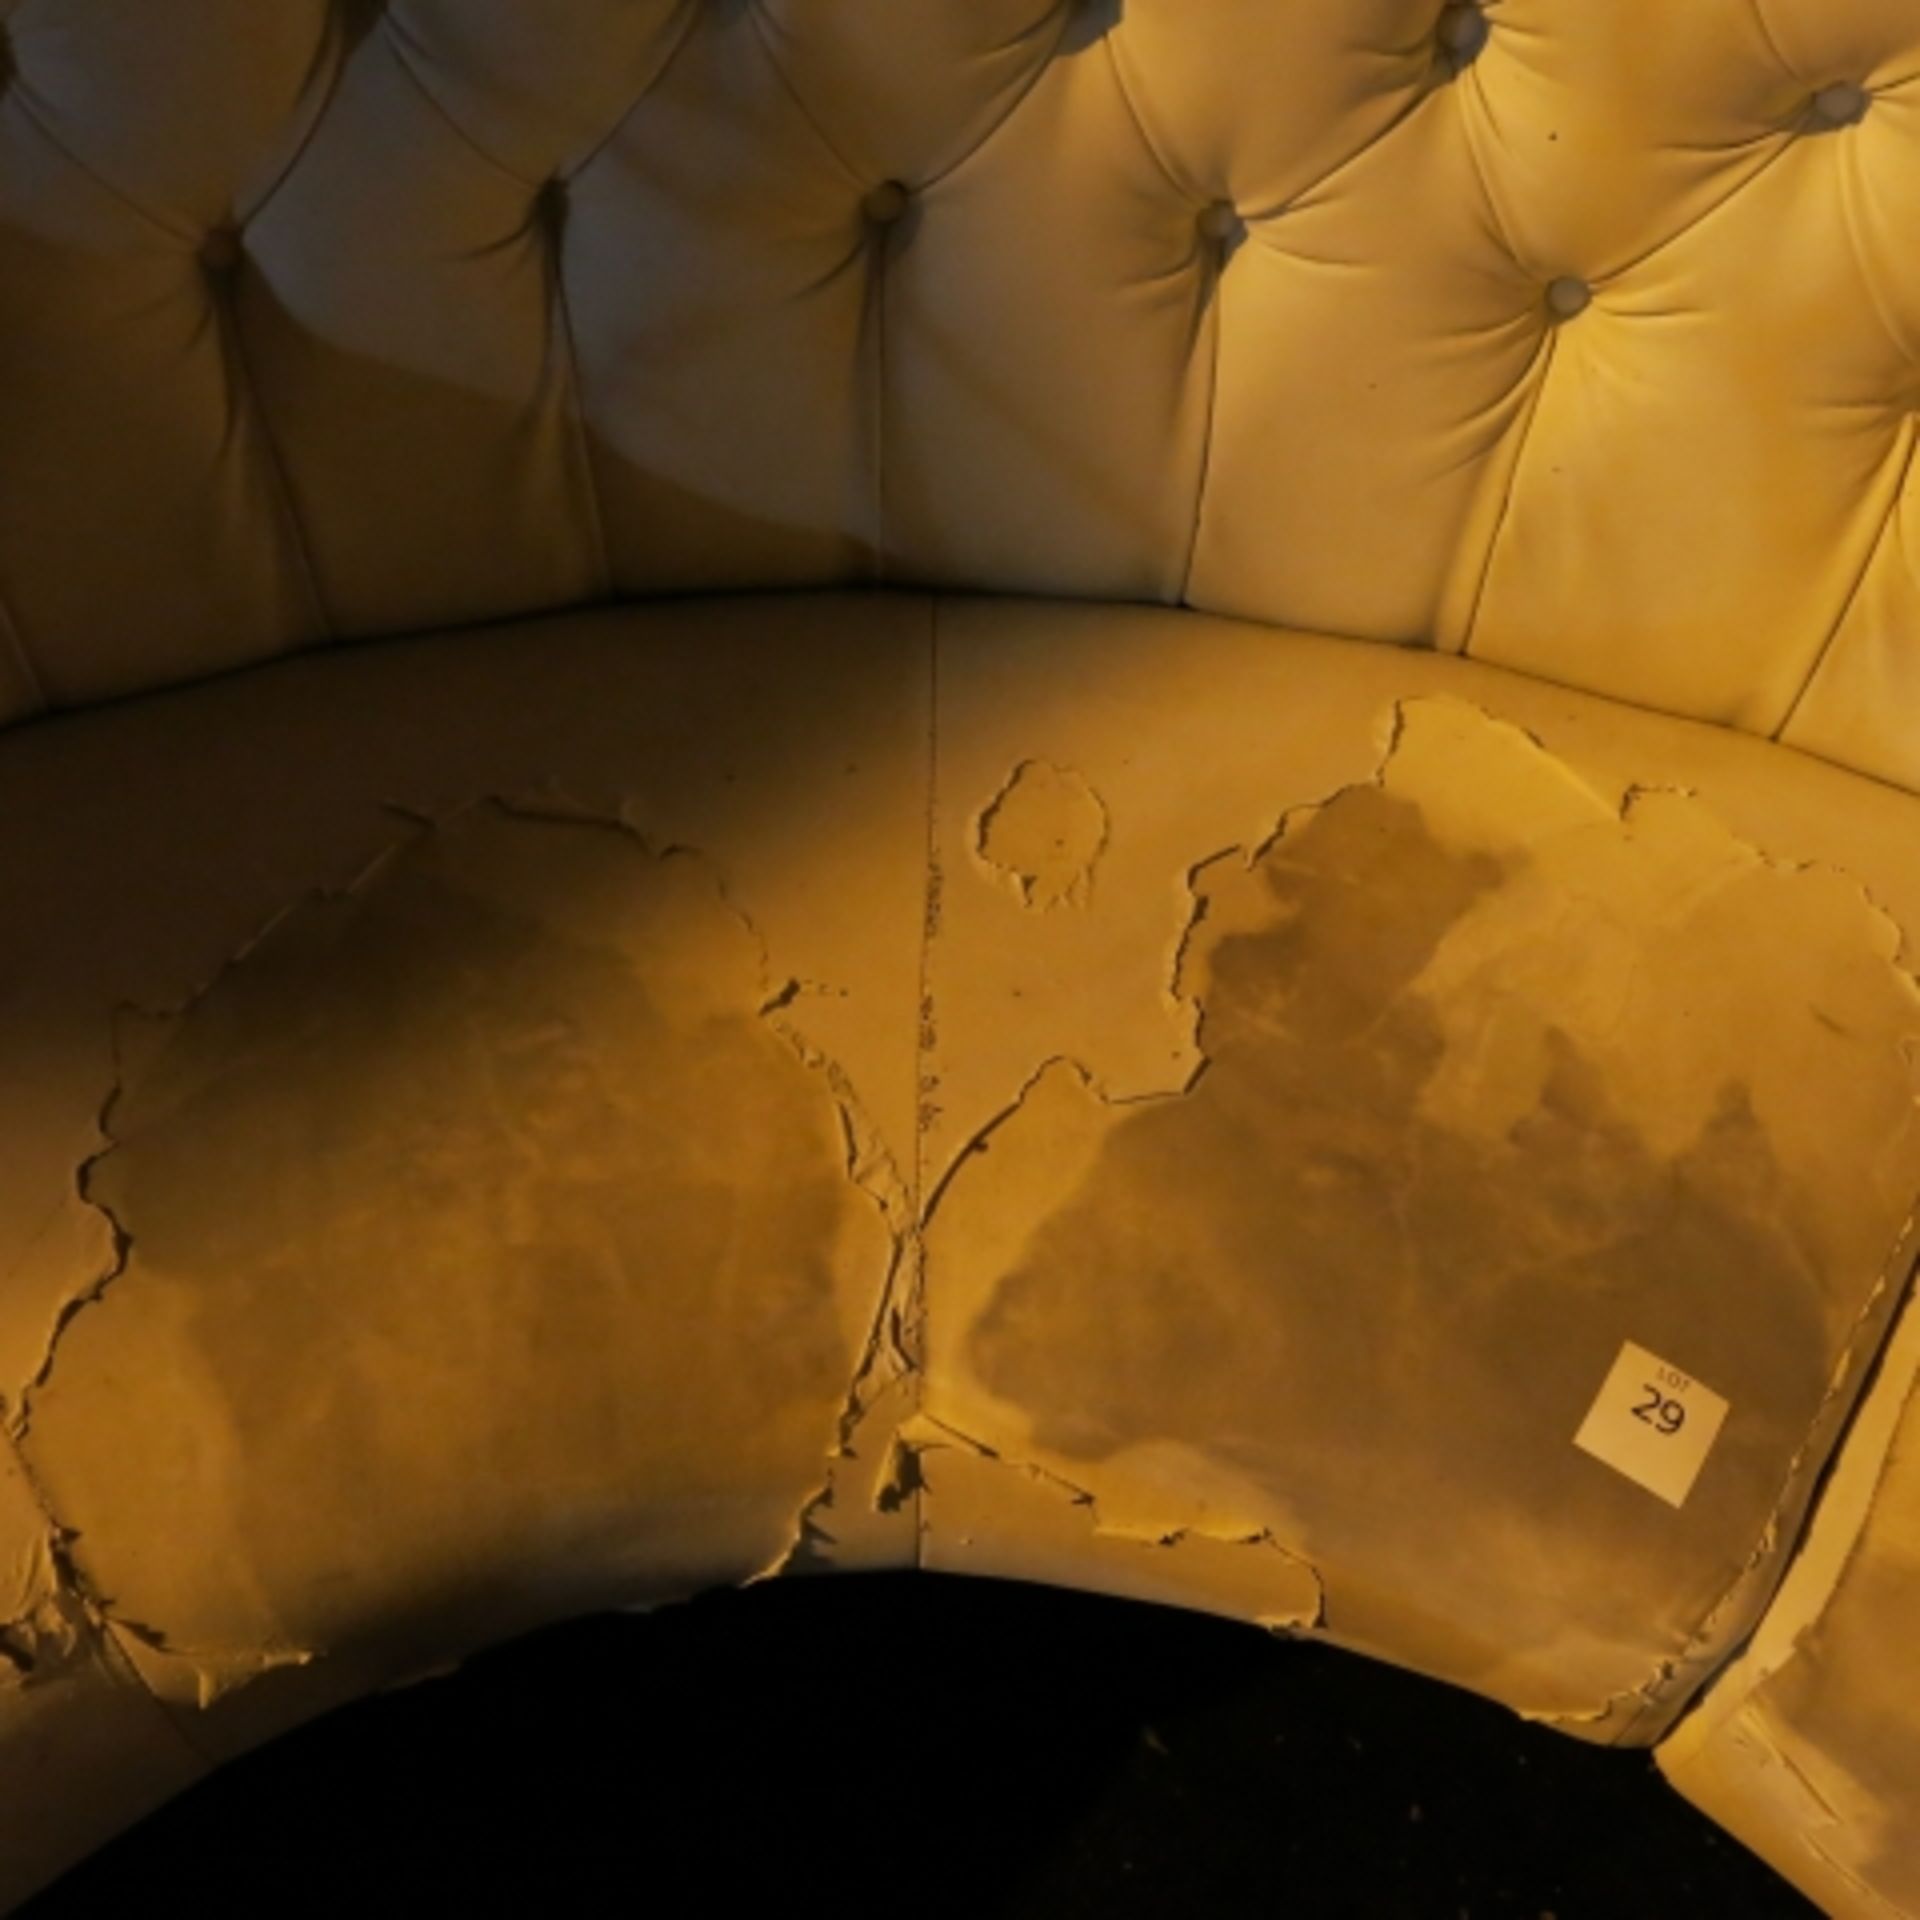 Cream Circular Button Back Seating Unit c/w 6 Spot Light Built in Unit, some damage. - Image 3 of 3